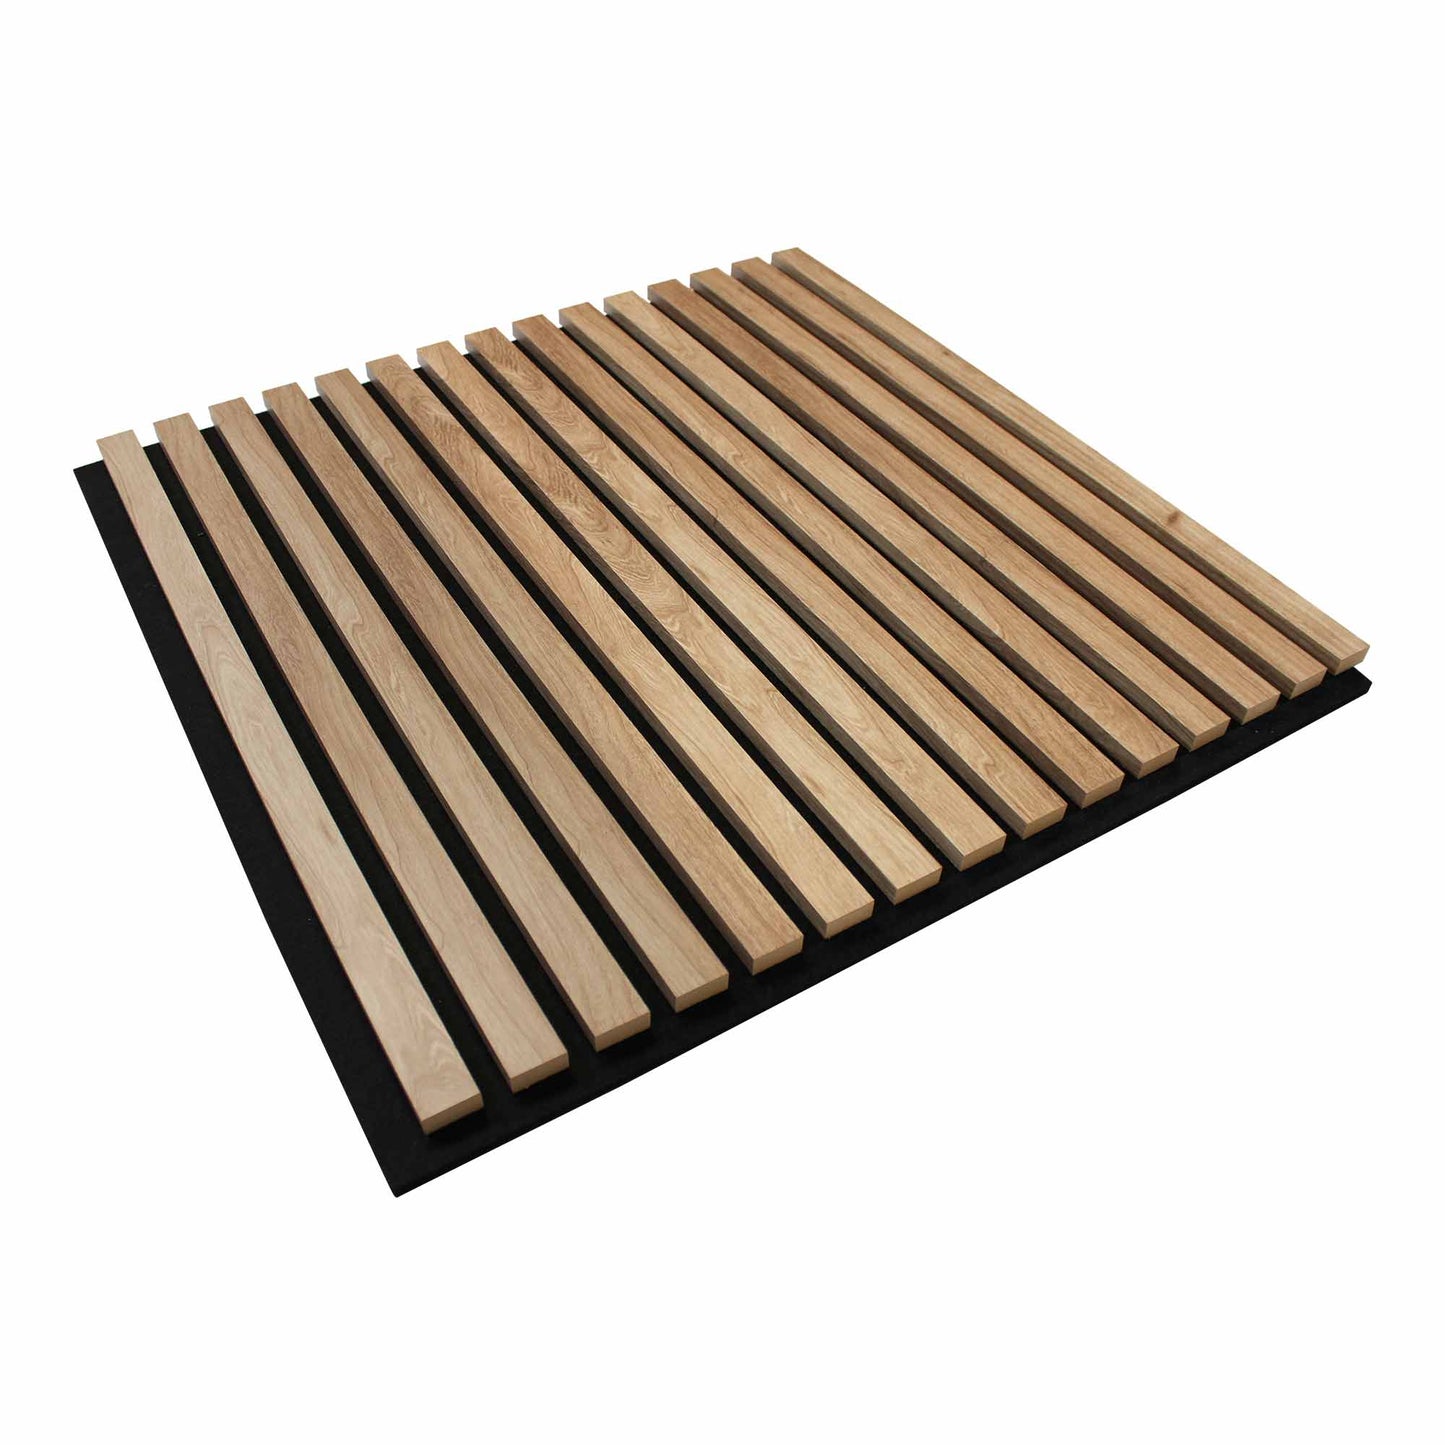 Light Walnut Acoustic Slat Wood Paneling for Soundproofing Walls - Square Tiles (24" x 24")